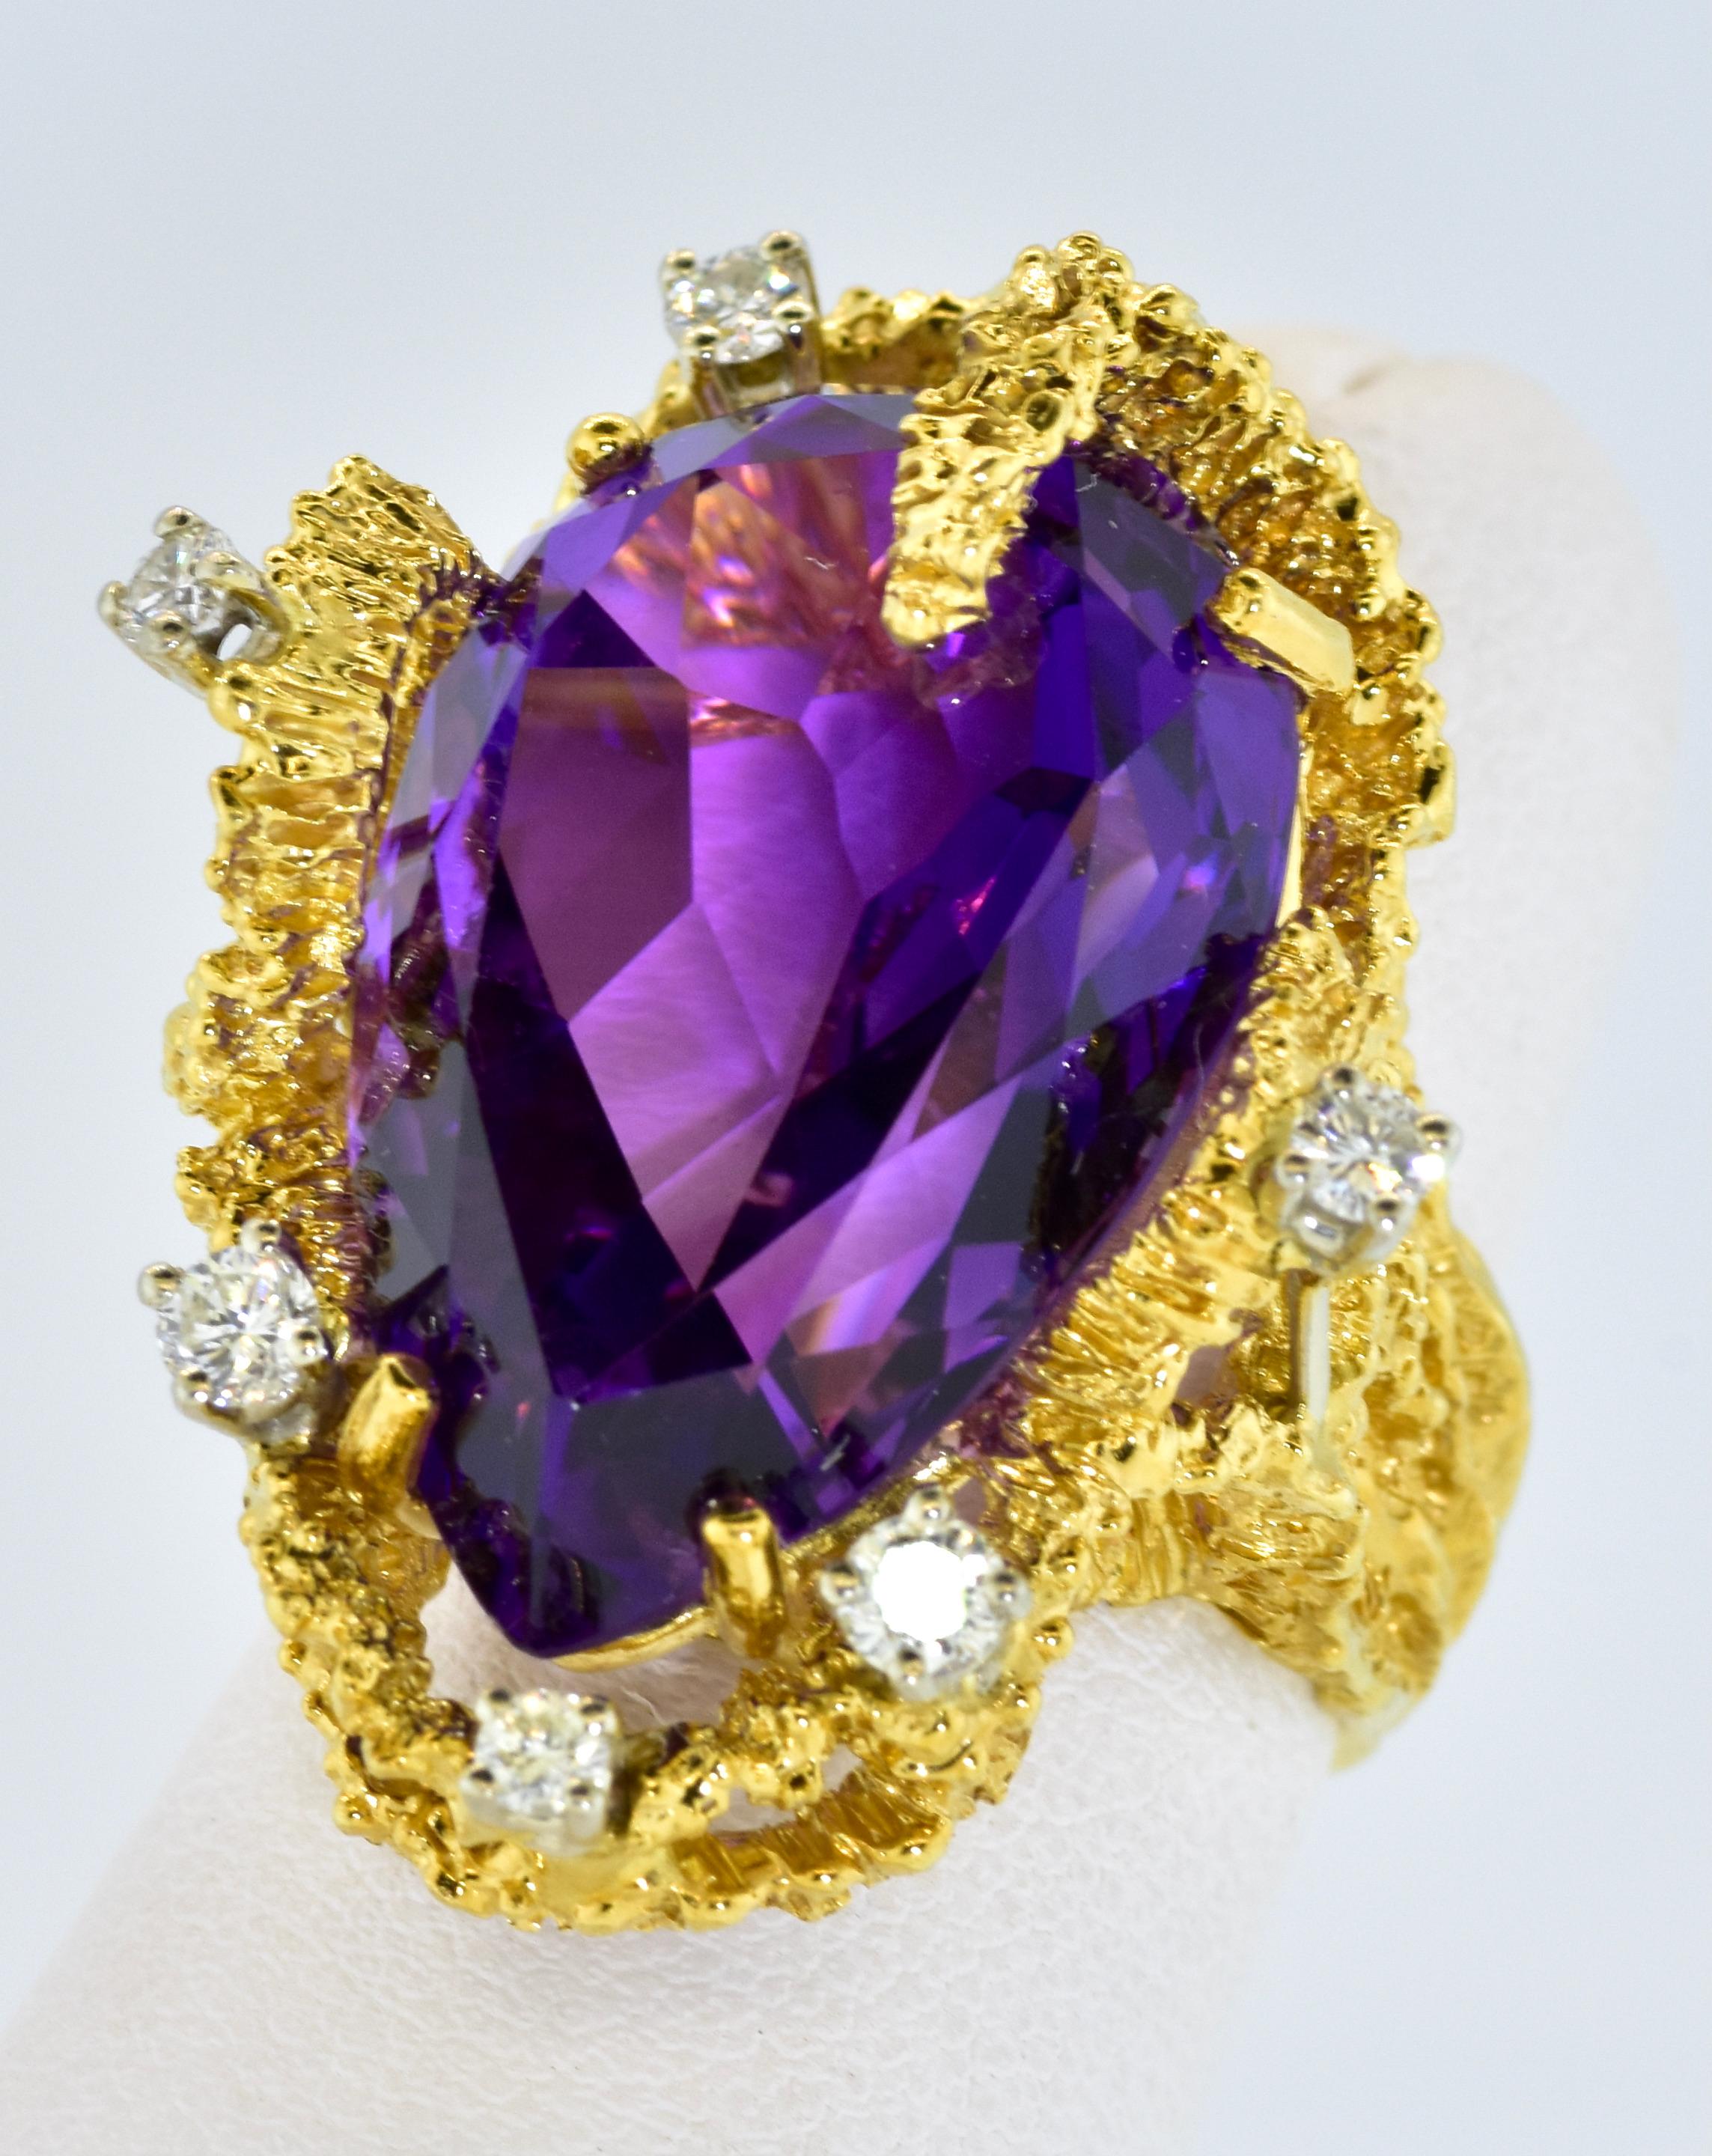 1960's Brutalist 18K ring with amethyst and diamonds probably by Arthur King an American designer in the 1960's and 1970's.  His jewelry can be seen in major museums such as MOMA and the V & A in London.  He was also collected by many of the major